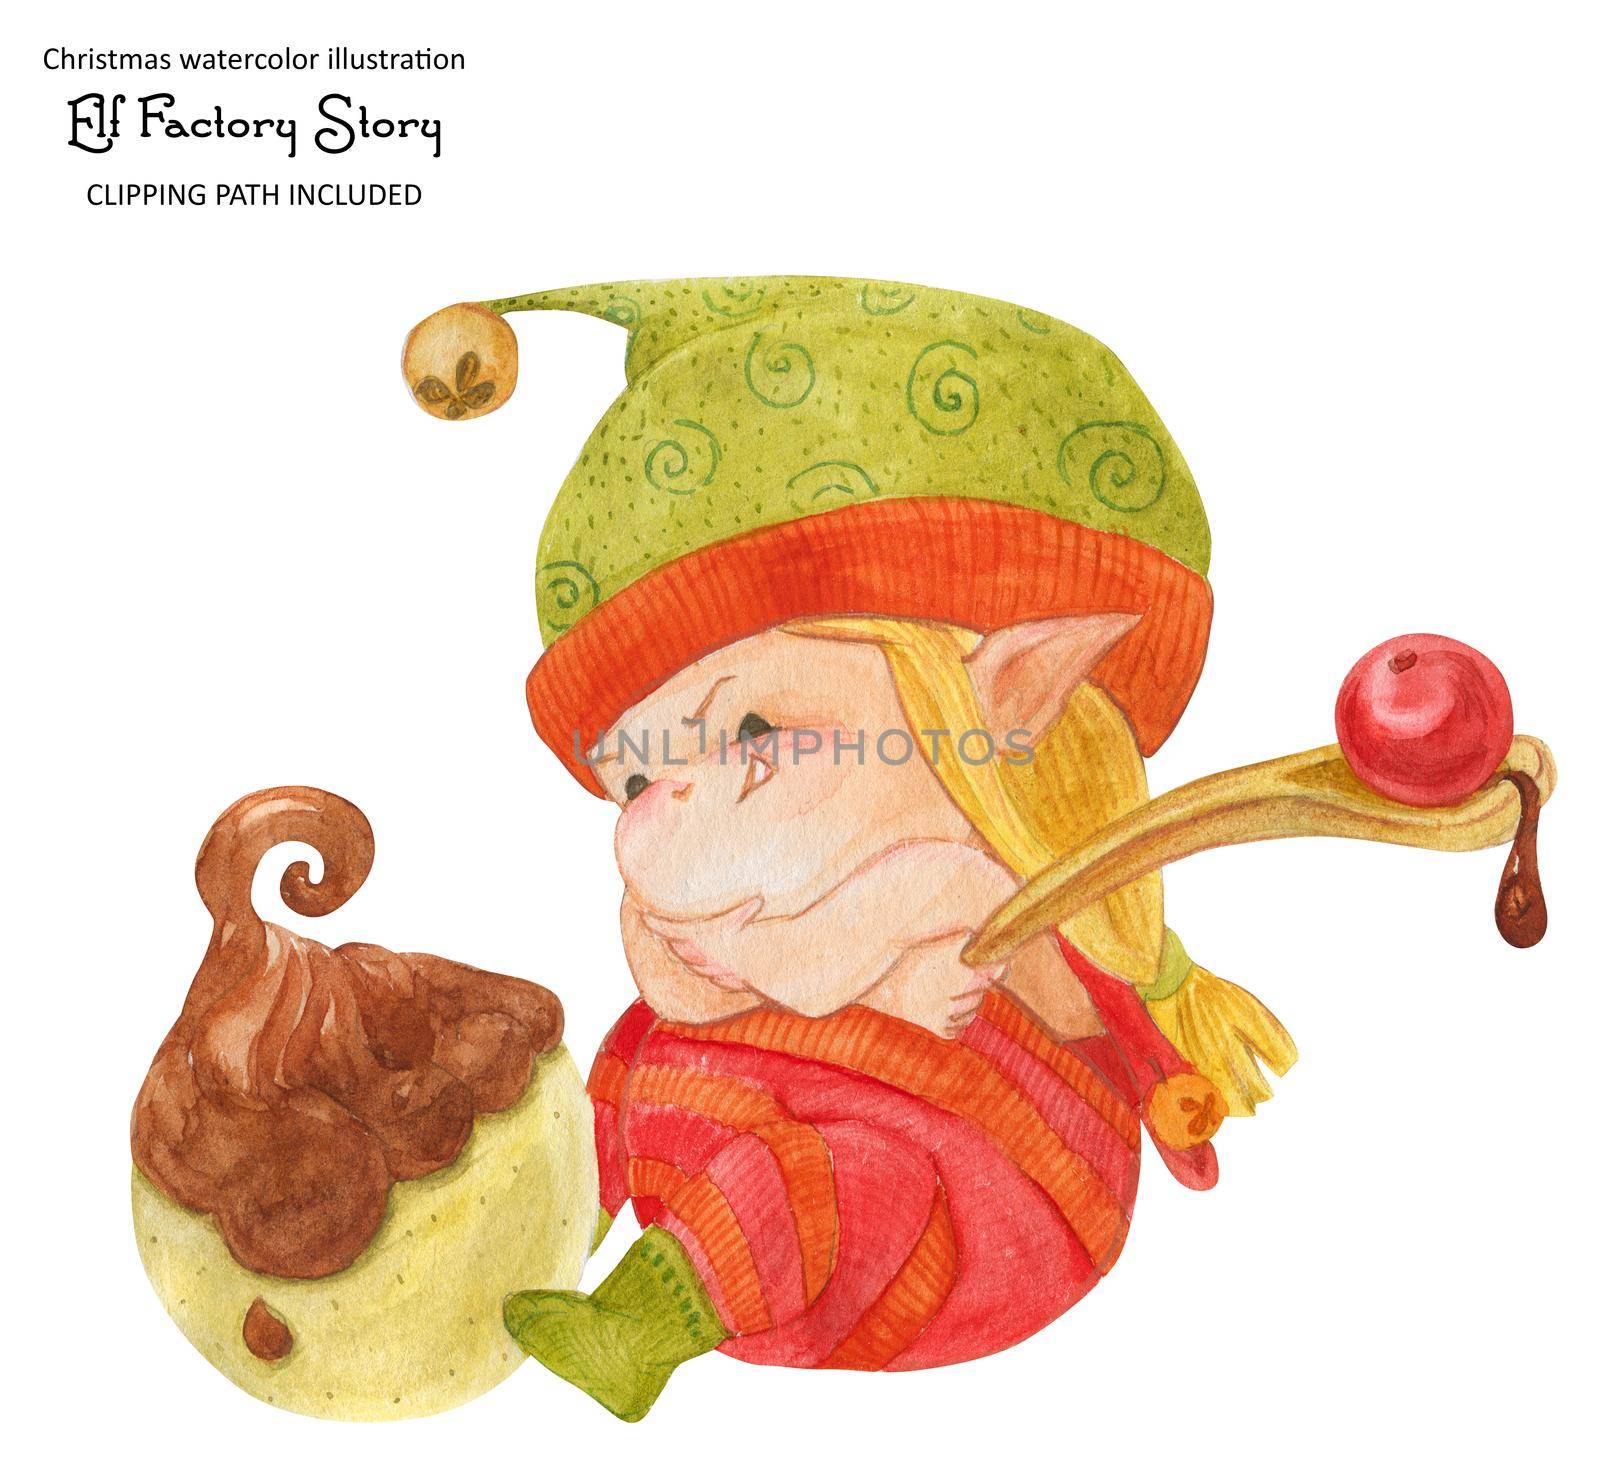 Christmas elf story, elf-artist decorating sweet candy, isolated watercolor and clipping path